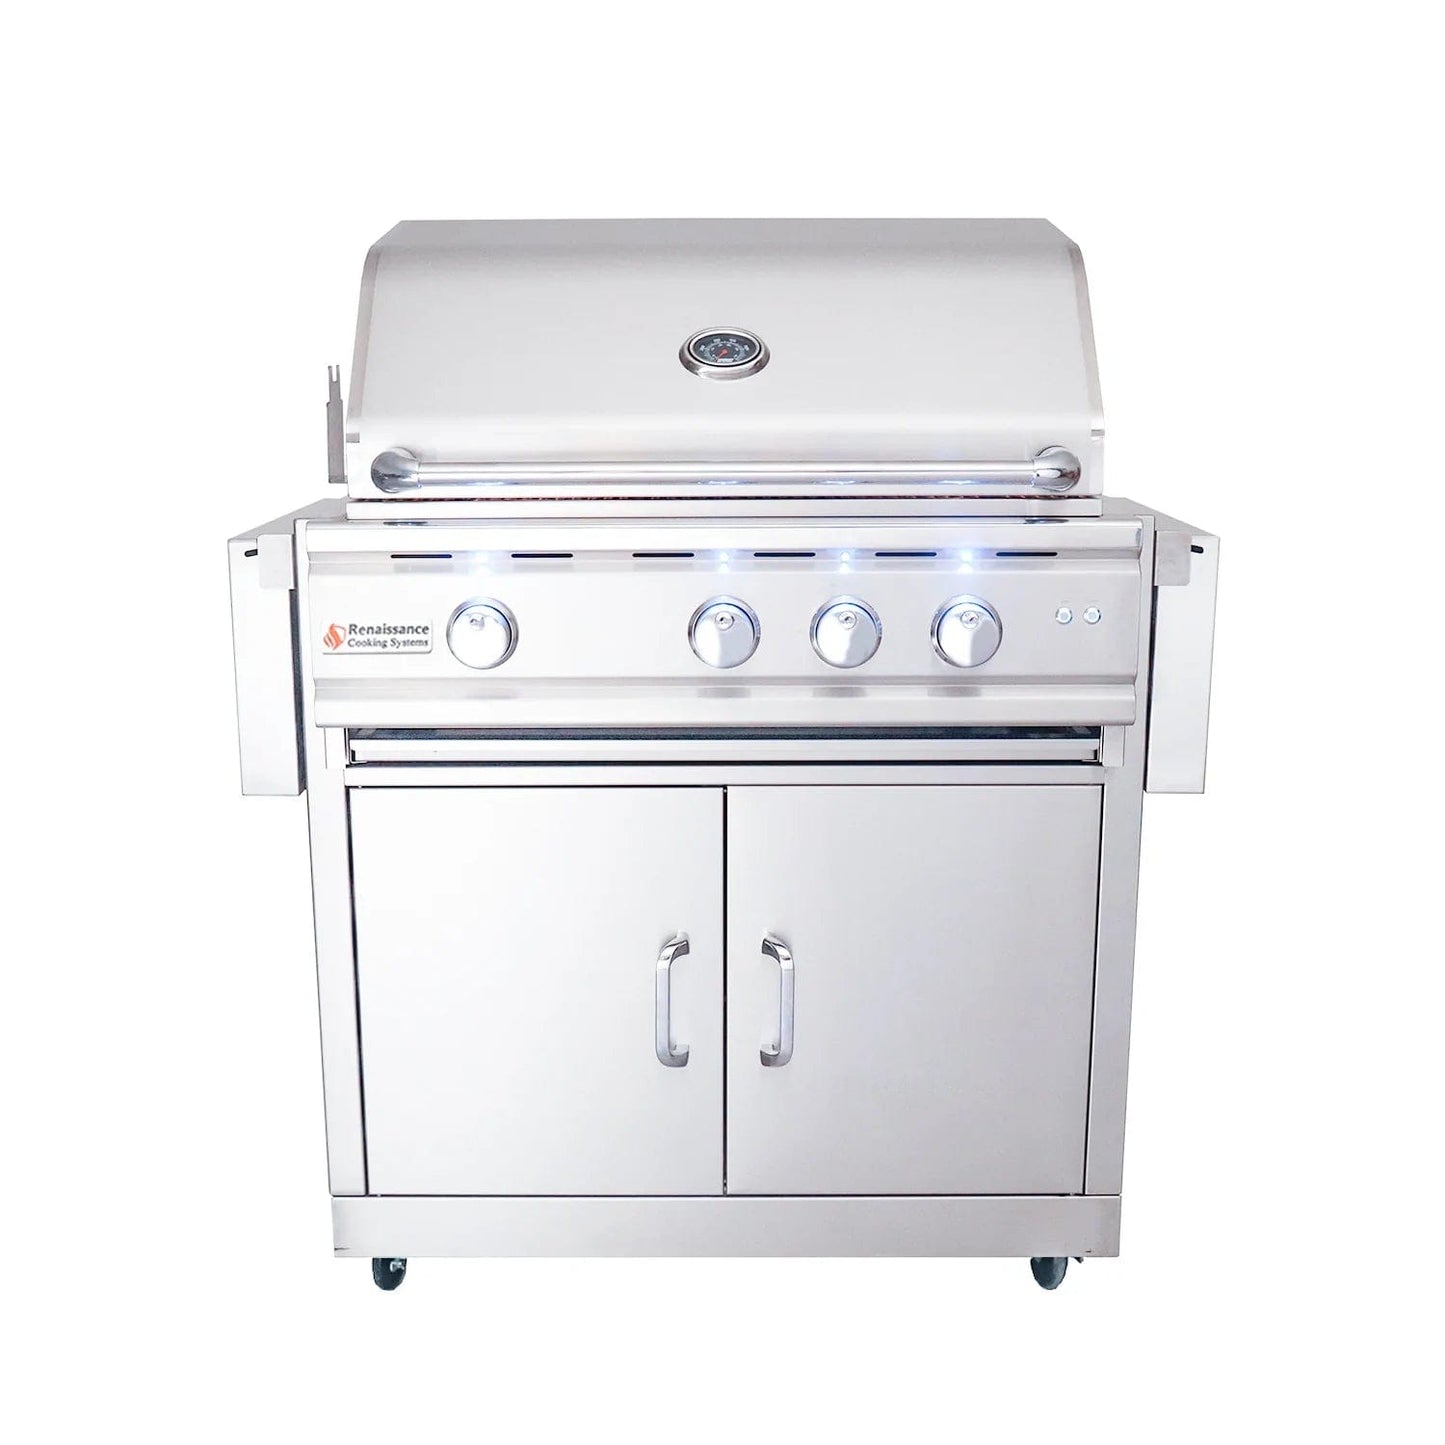 The Renaissance Cooking Systems - 30" Cutlass Pro Series Portable Grill - Kitchen King Direct